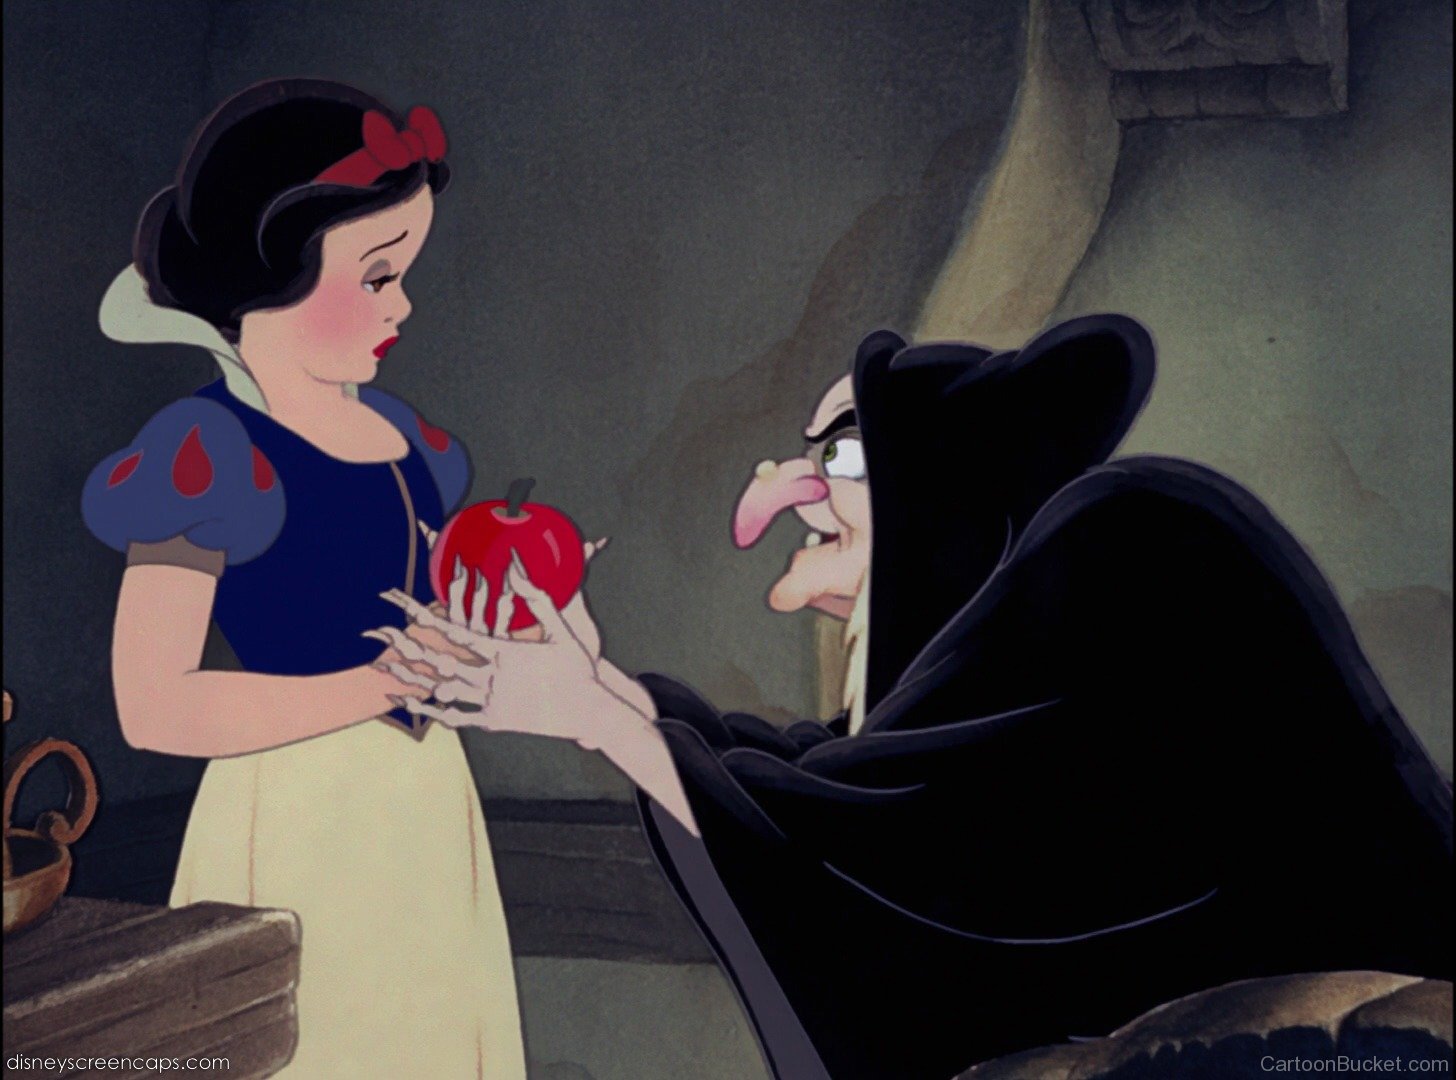 The Witch Giving Apple To Princess Snow White.